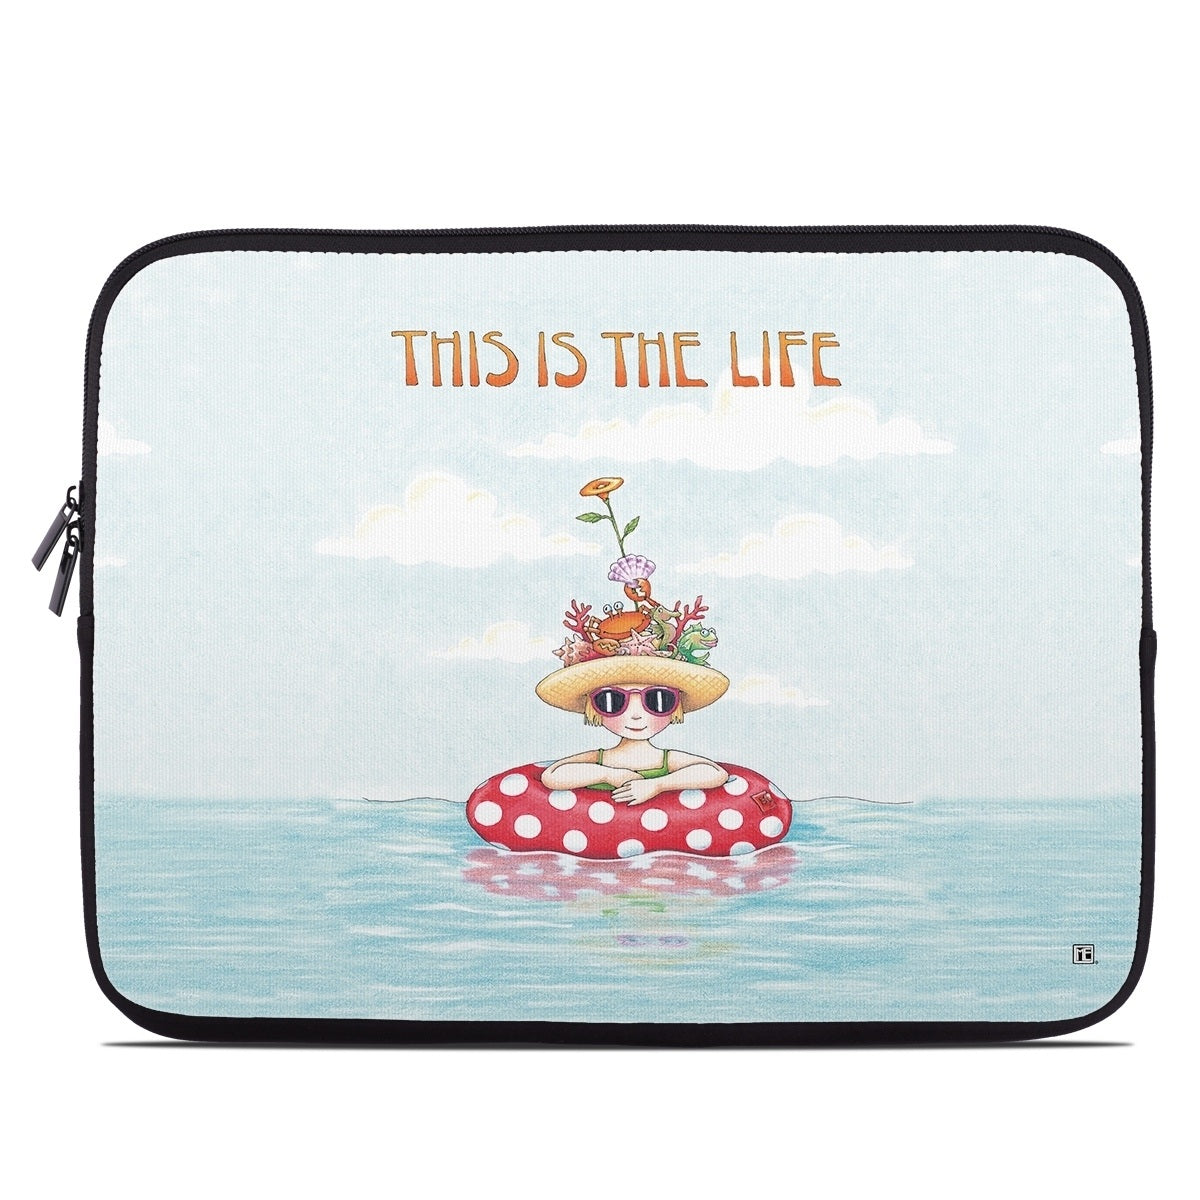 This Is The Life - Laptop Sleeve